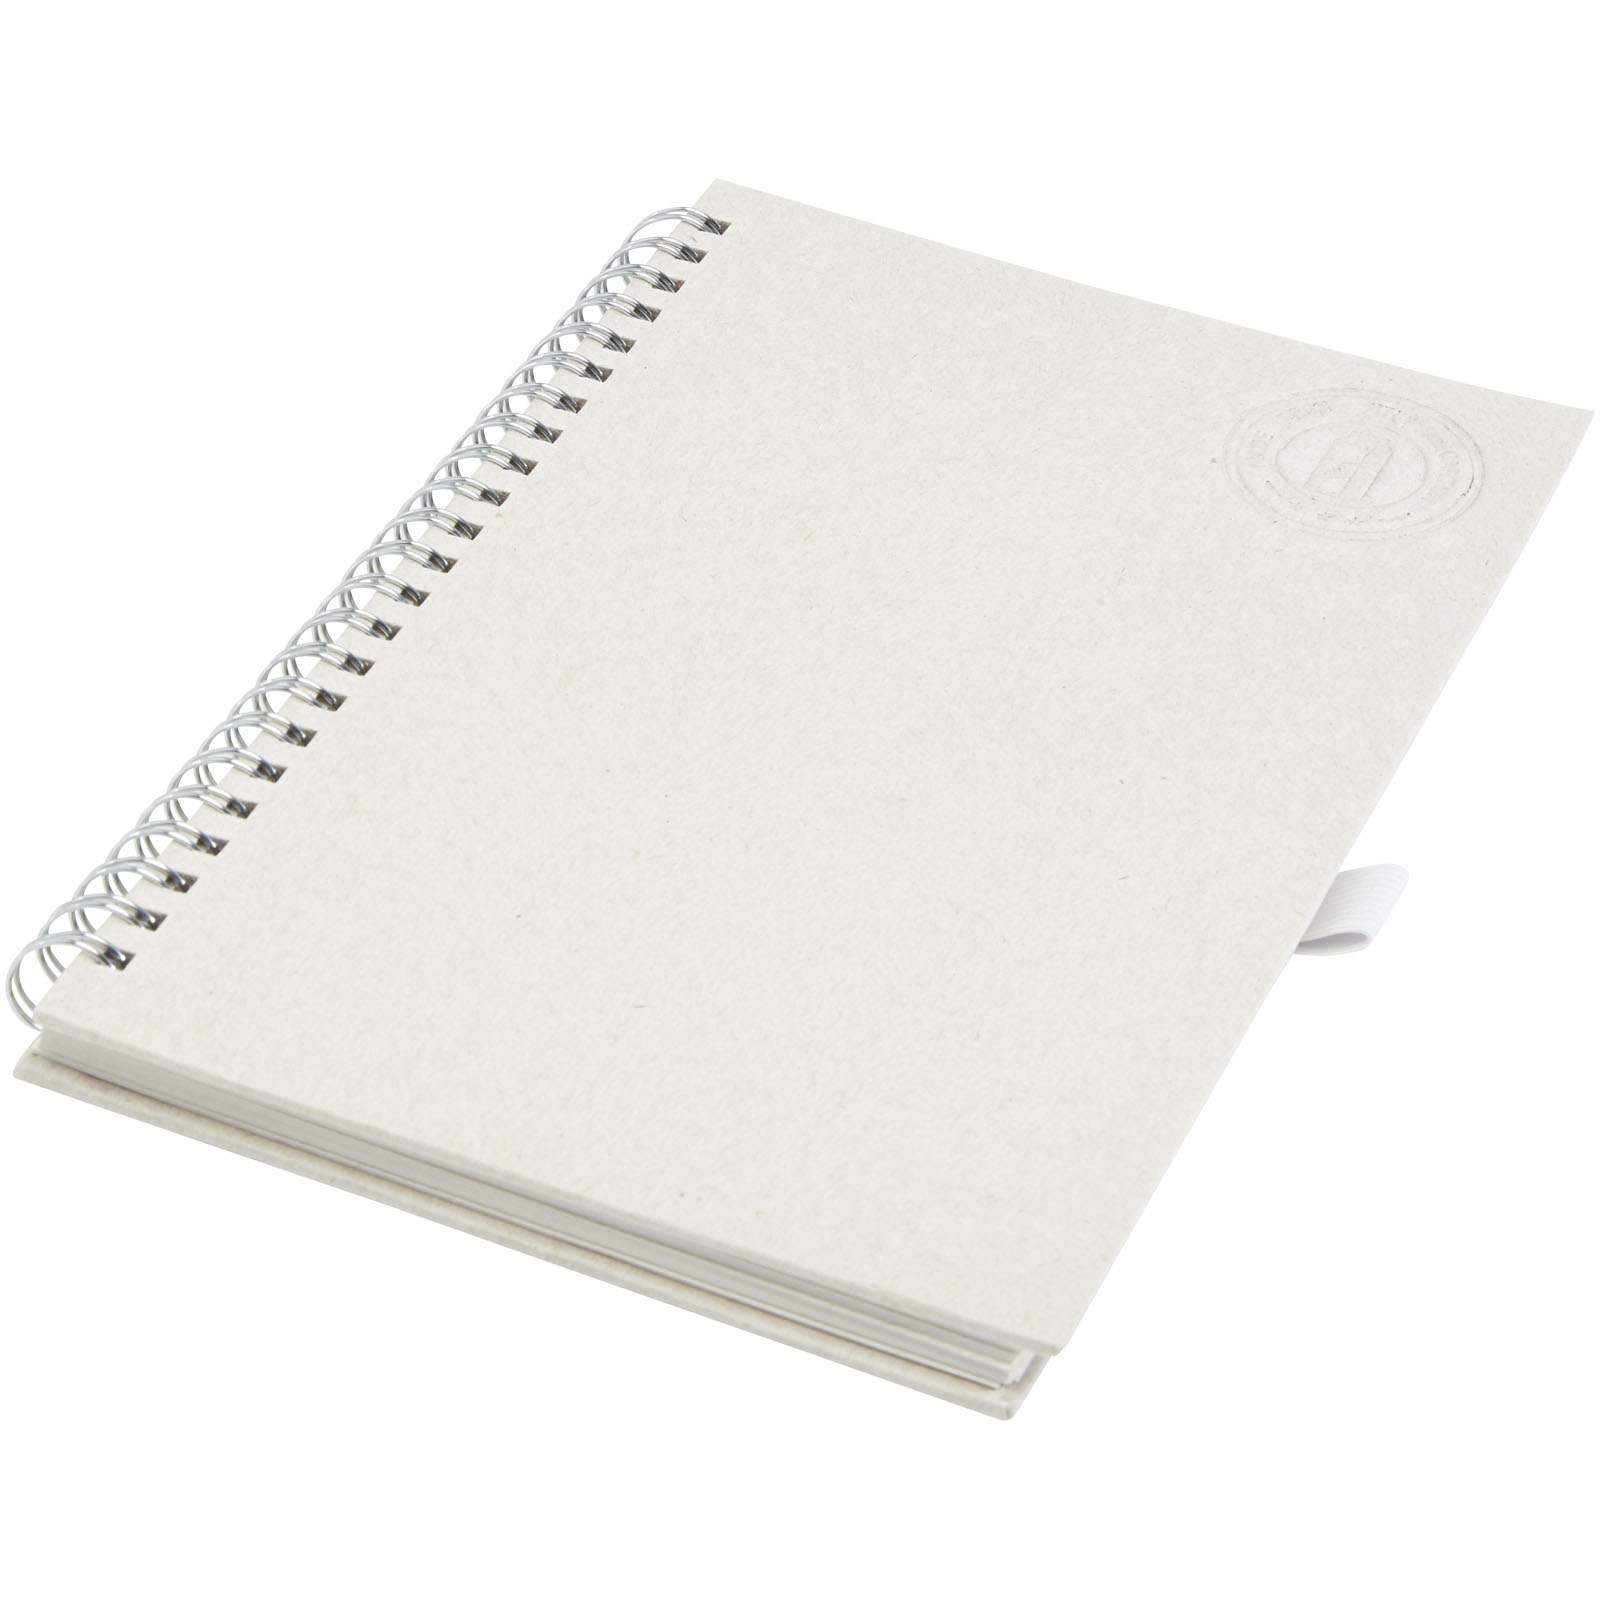 Advertising Hard cover notebooks - Dairy Dream A5 size reference recycled milk cartons spiral notebook - 0